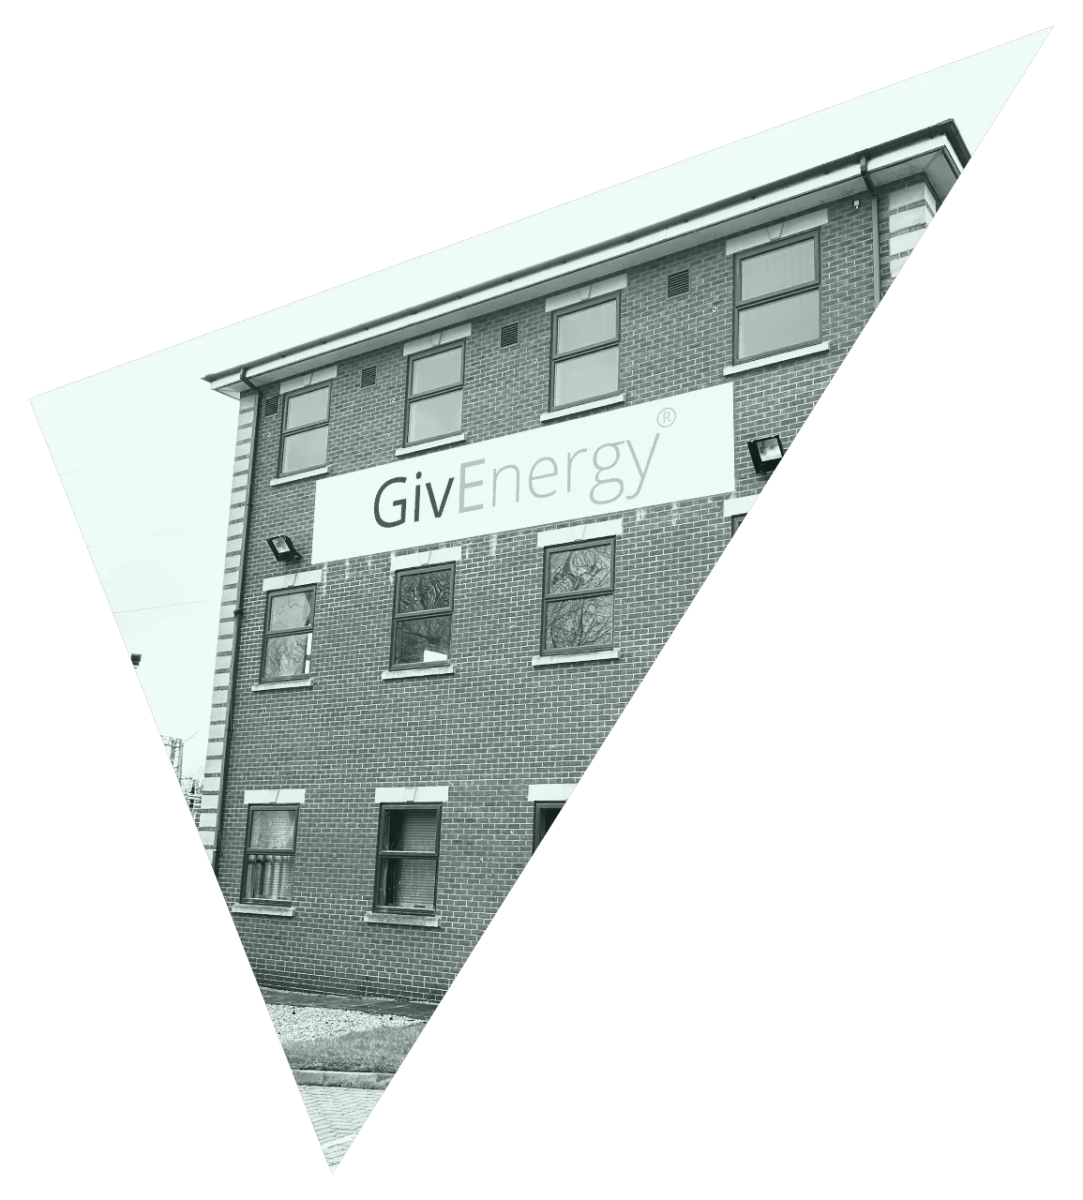 Our story - GivEnergy HQ